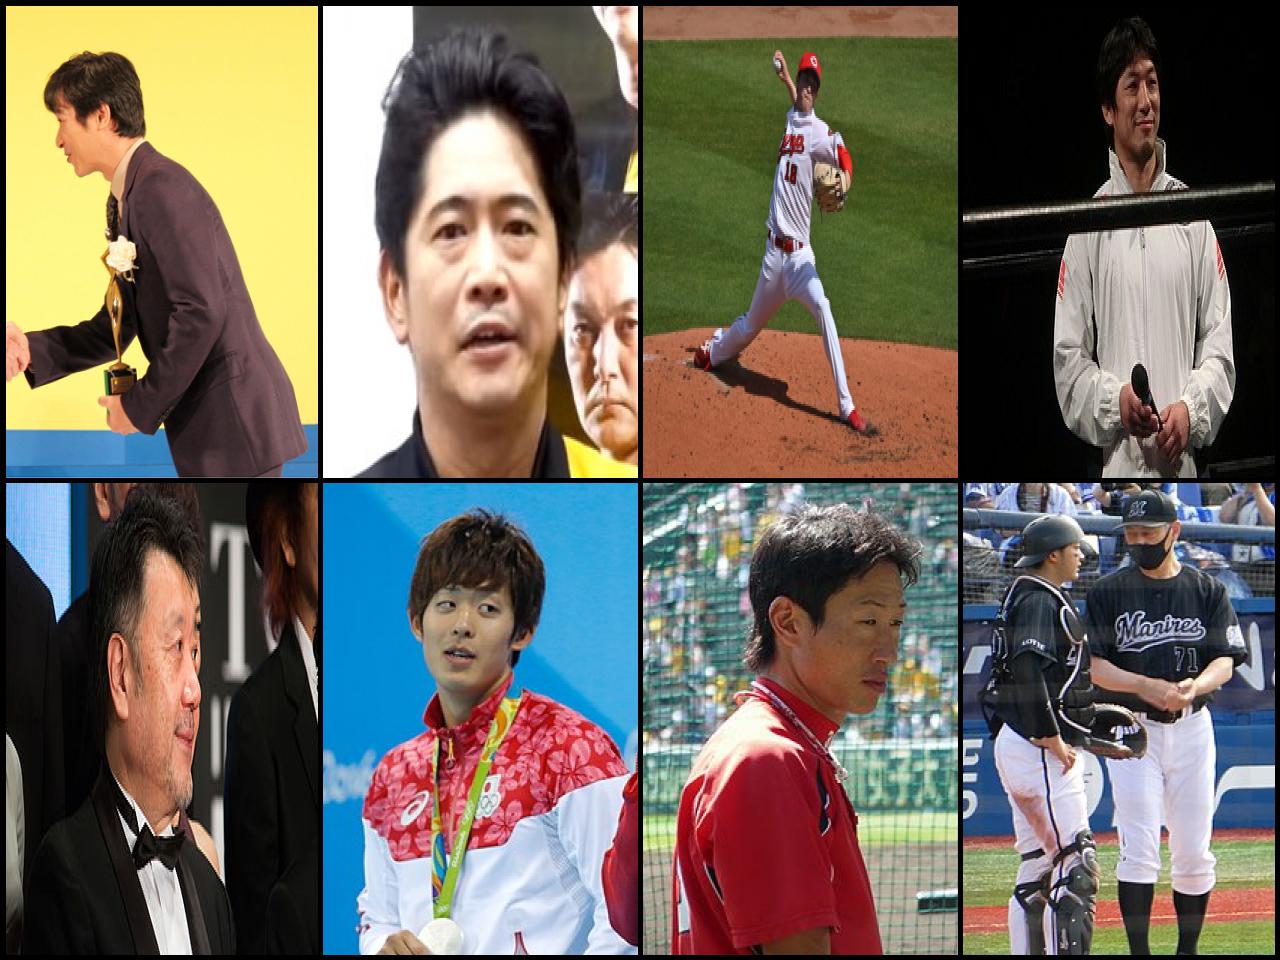 List of Famous people named <b>Masato</b>